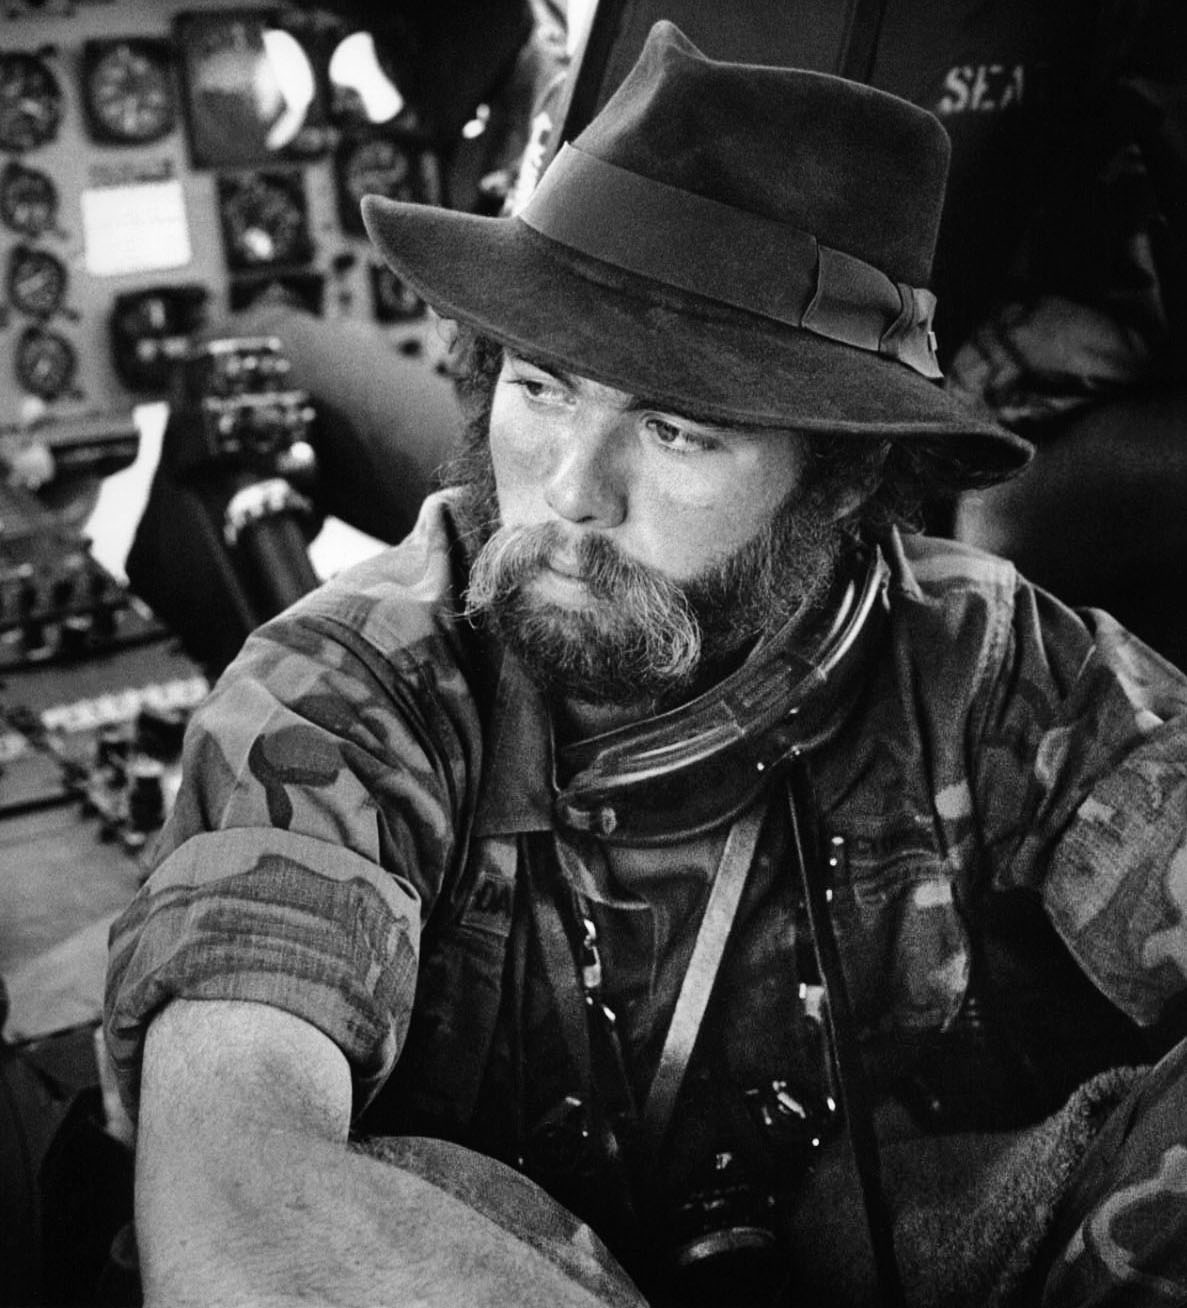 UPI photographer Kennerly on a helicopter in the Central Highlands of Vietnam in 1971. Photo by Matt Franjola